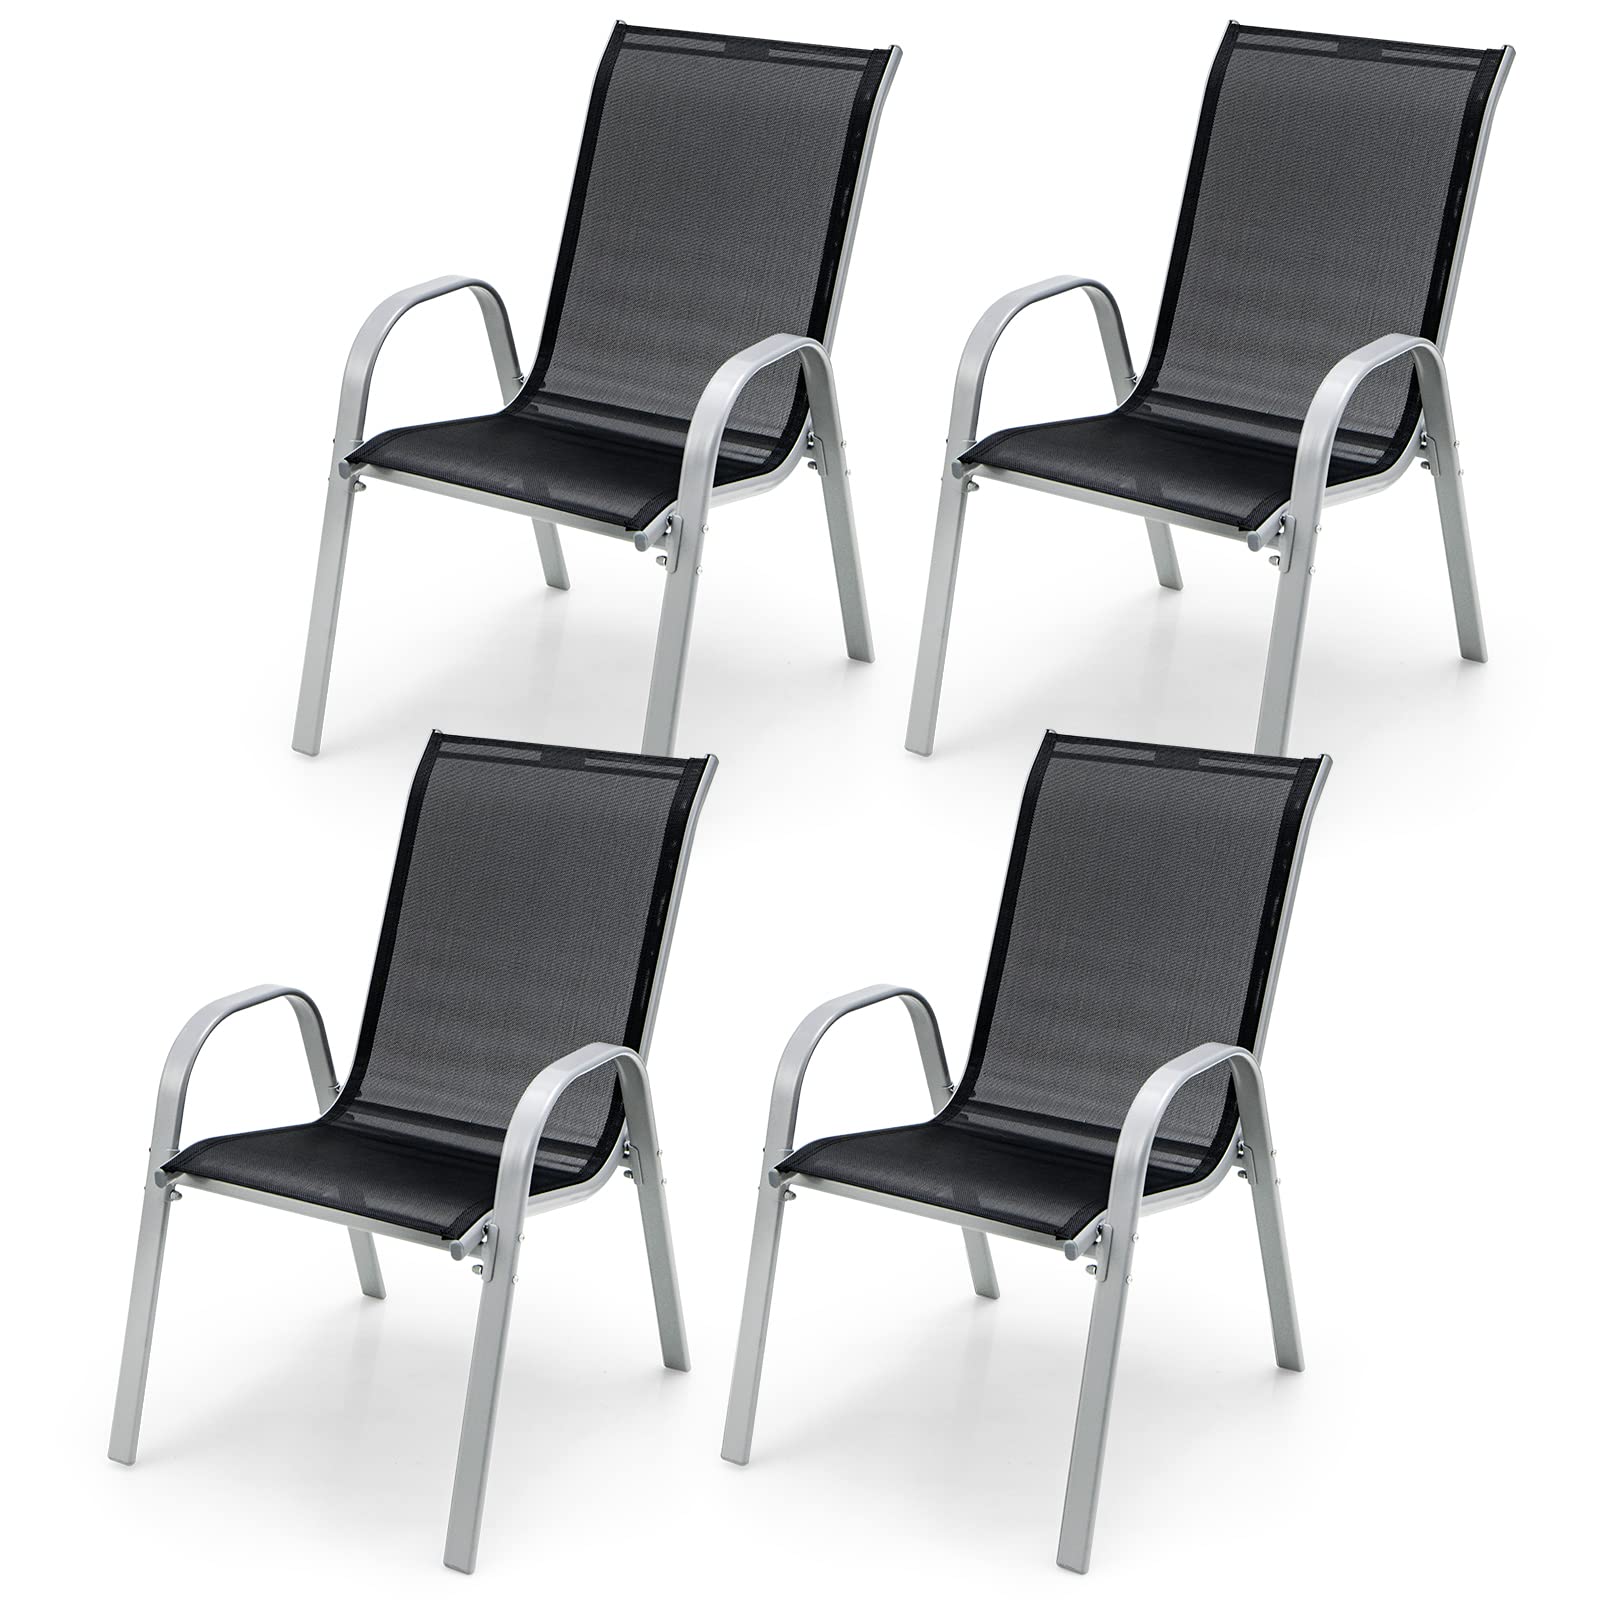 W/Curved Armrests – Set 4 of Chairs, Chairs Giantex Patio Outdoor Giantexus Dining